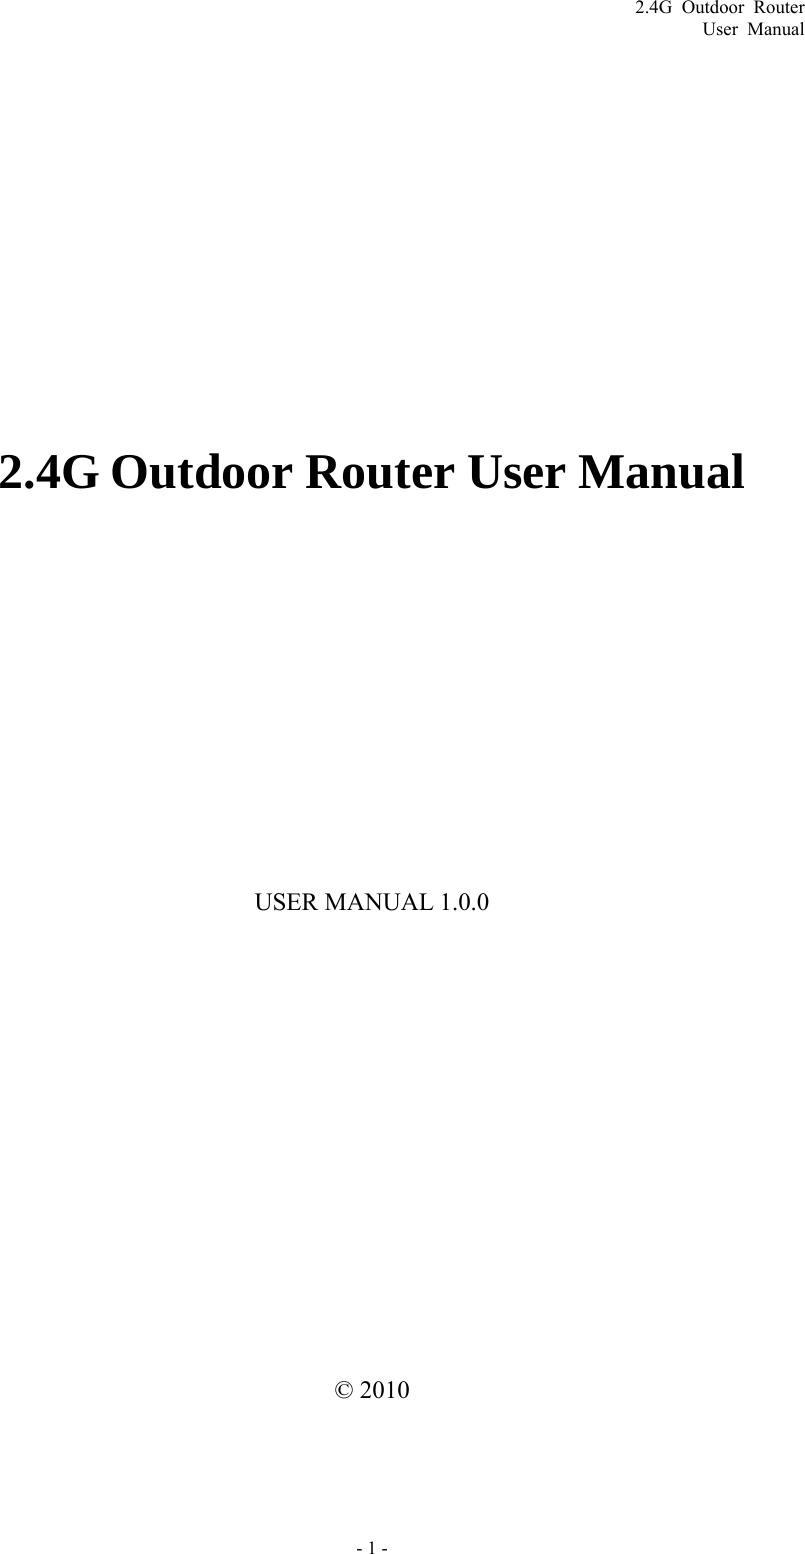 2.4G Outdoor Router User Manual 2.4G Outdoor Router User Manual USER MANUAL 1.0.0 © 2010   - 1 - 